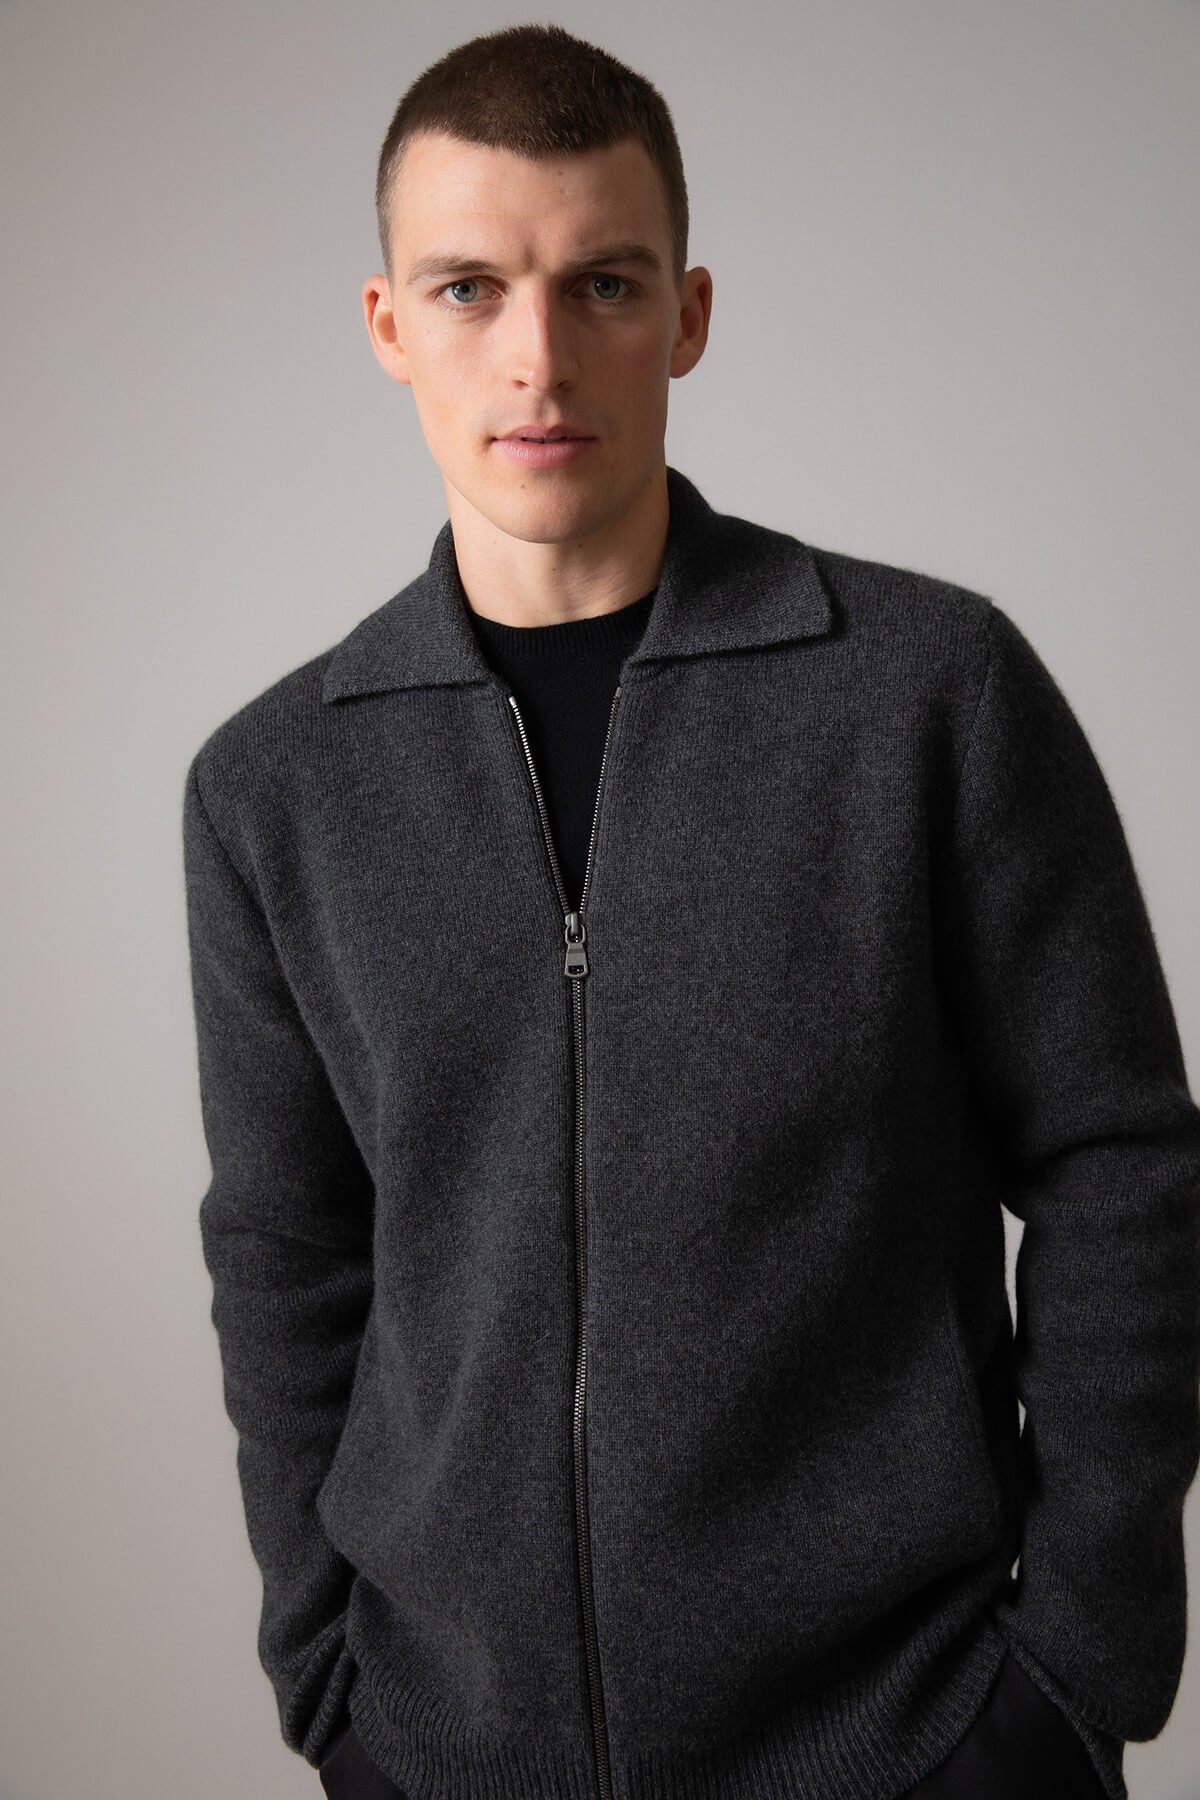 Johnstons of Elgin’s Men's Milano Stitch Cashmere Zip Jacket in Charcoal grey on model wearing black trousers on a grey background KAA05113HA7165